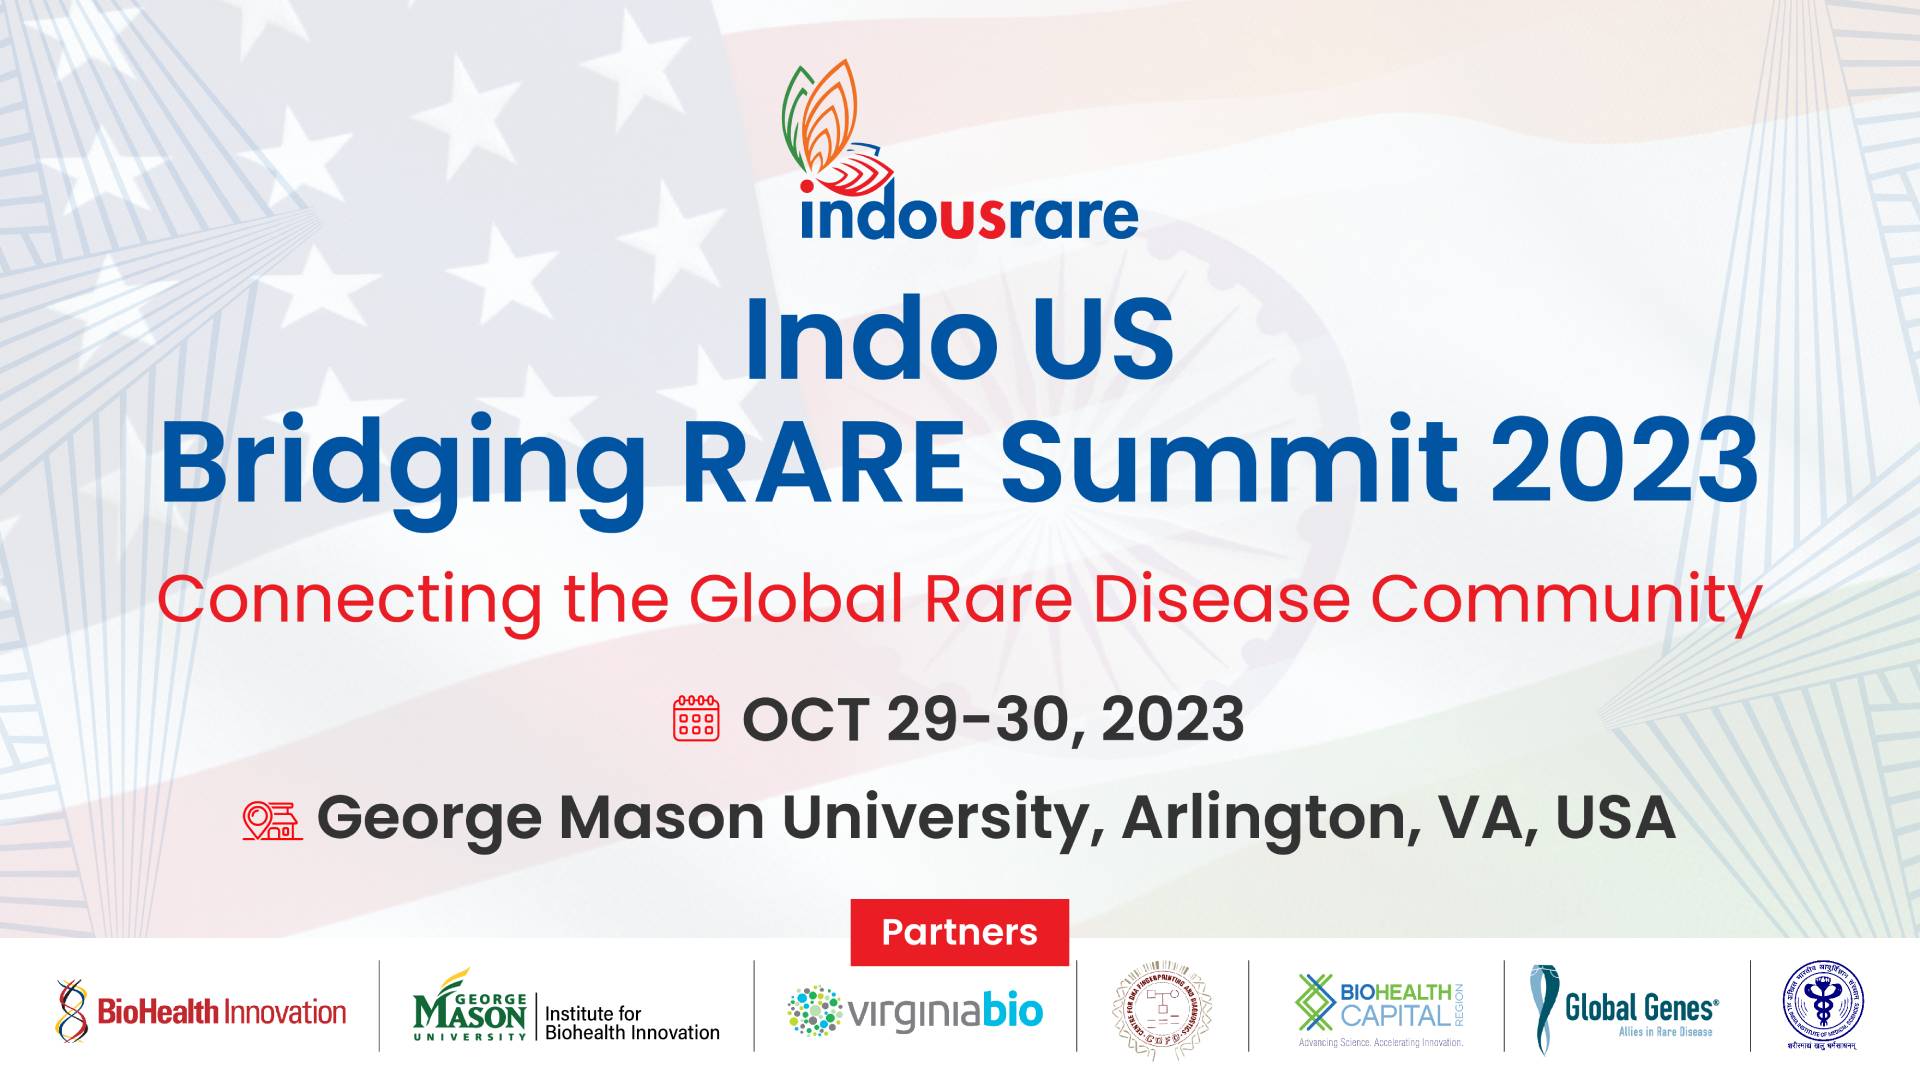 The banner of the Indo US Bridging RARE Summit 2023 on October 29 – 30, 2023.